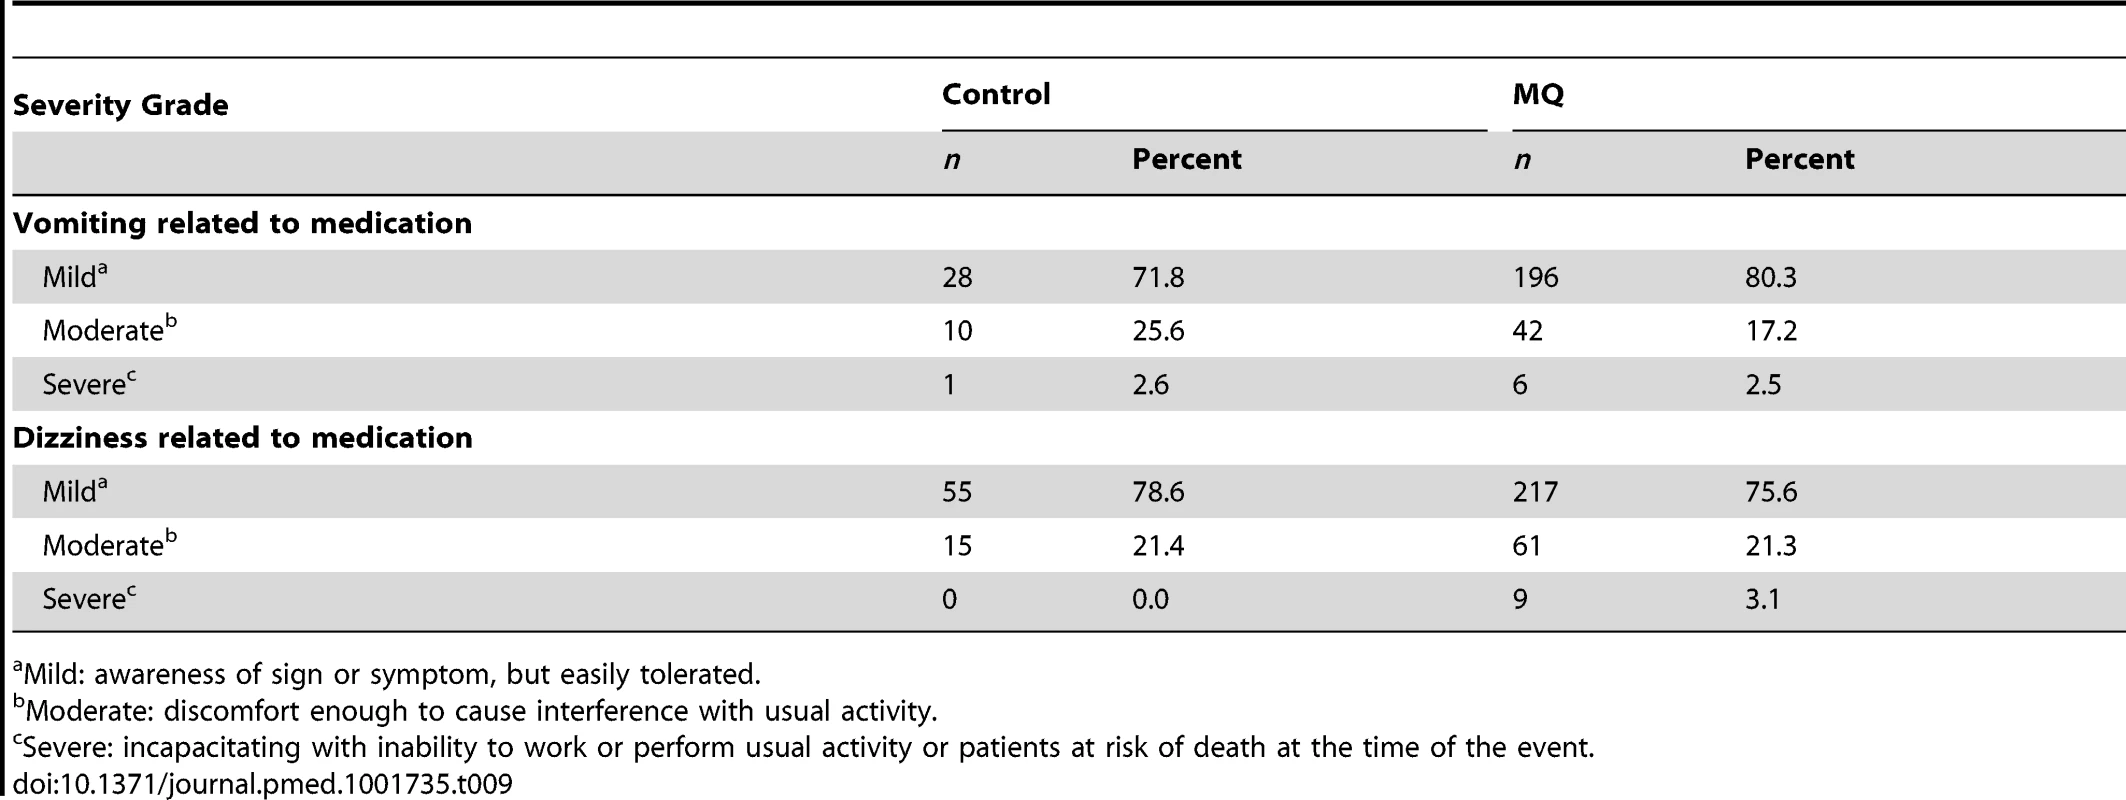 Severity of reported vomiting and dizziness by treatment group.